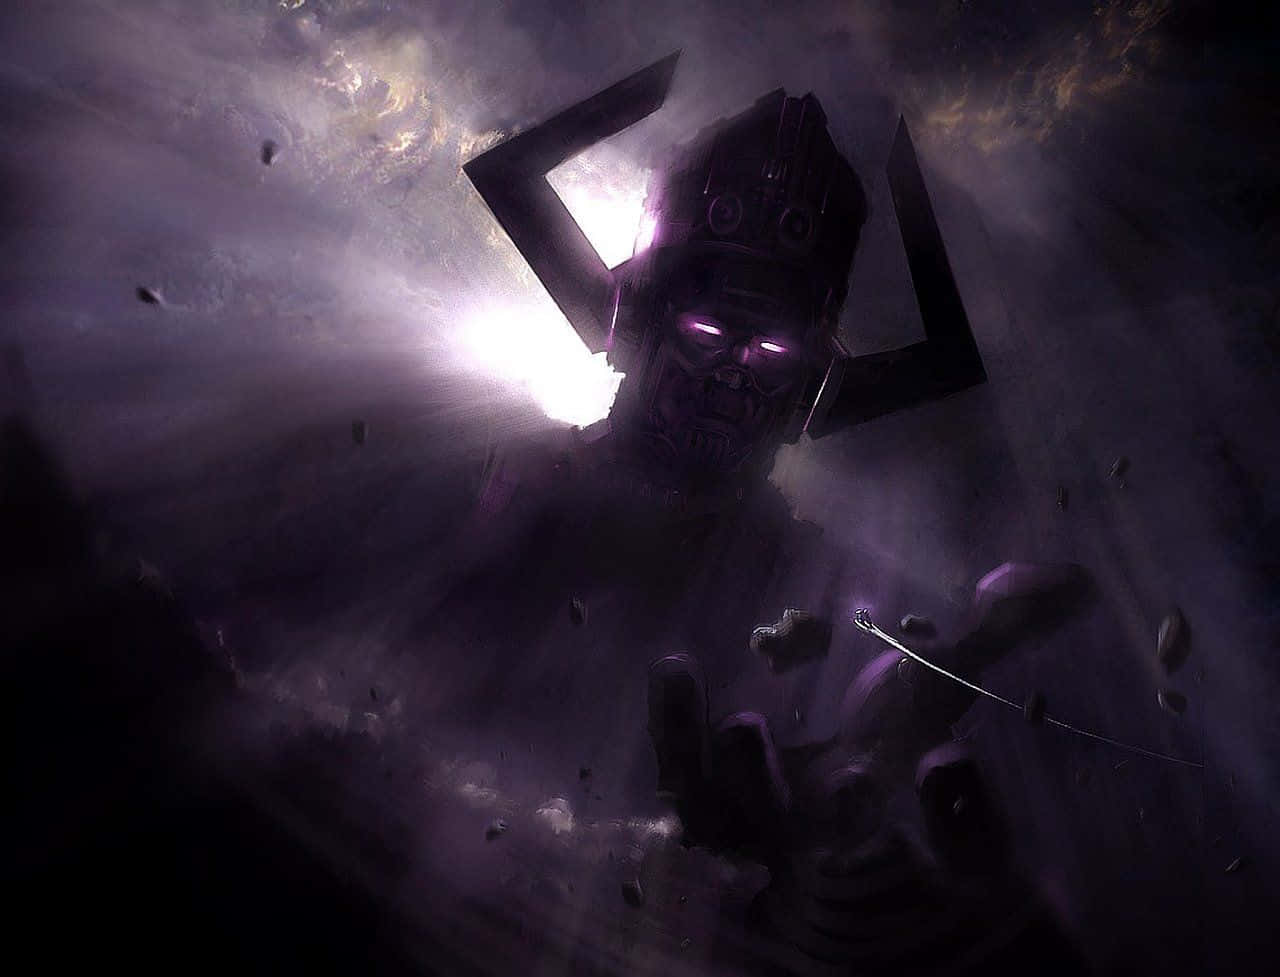 Galactus, Devourer of Worlds, looming over a destroyed planet. Wallpaper